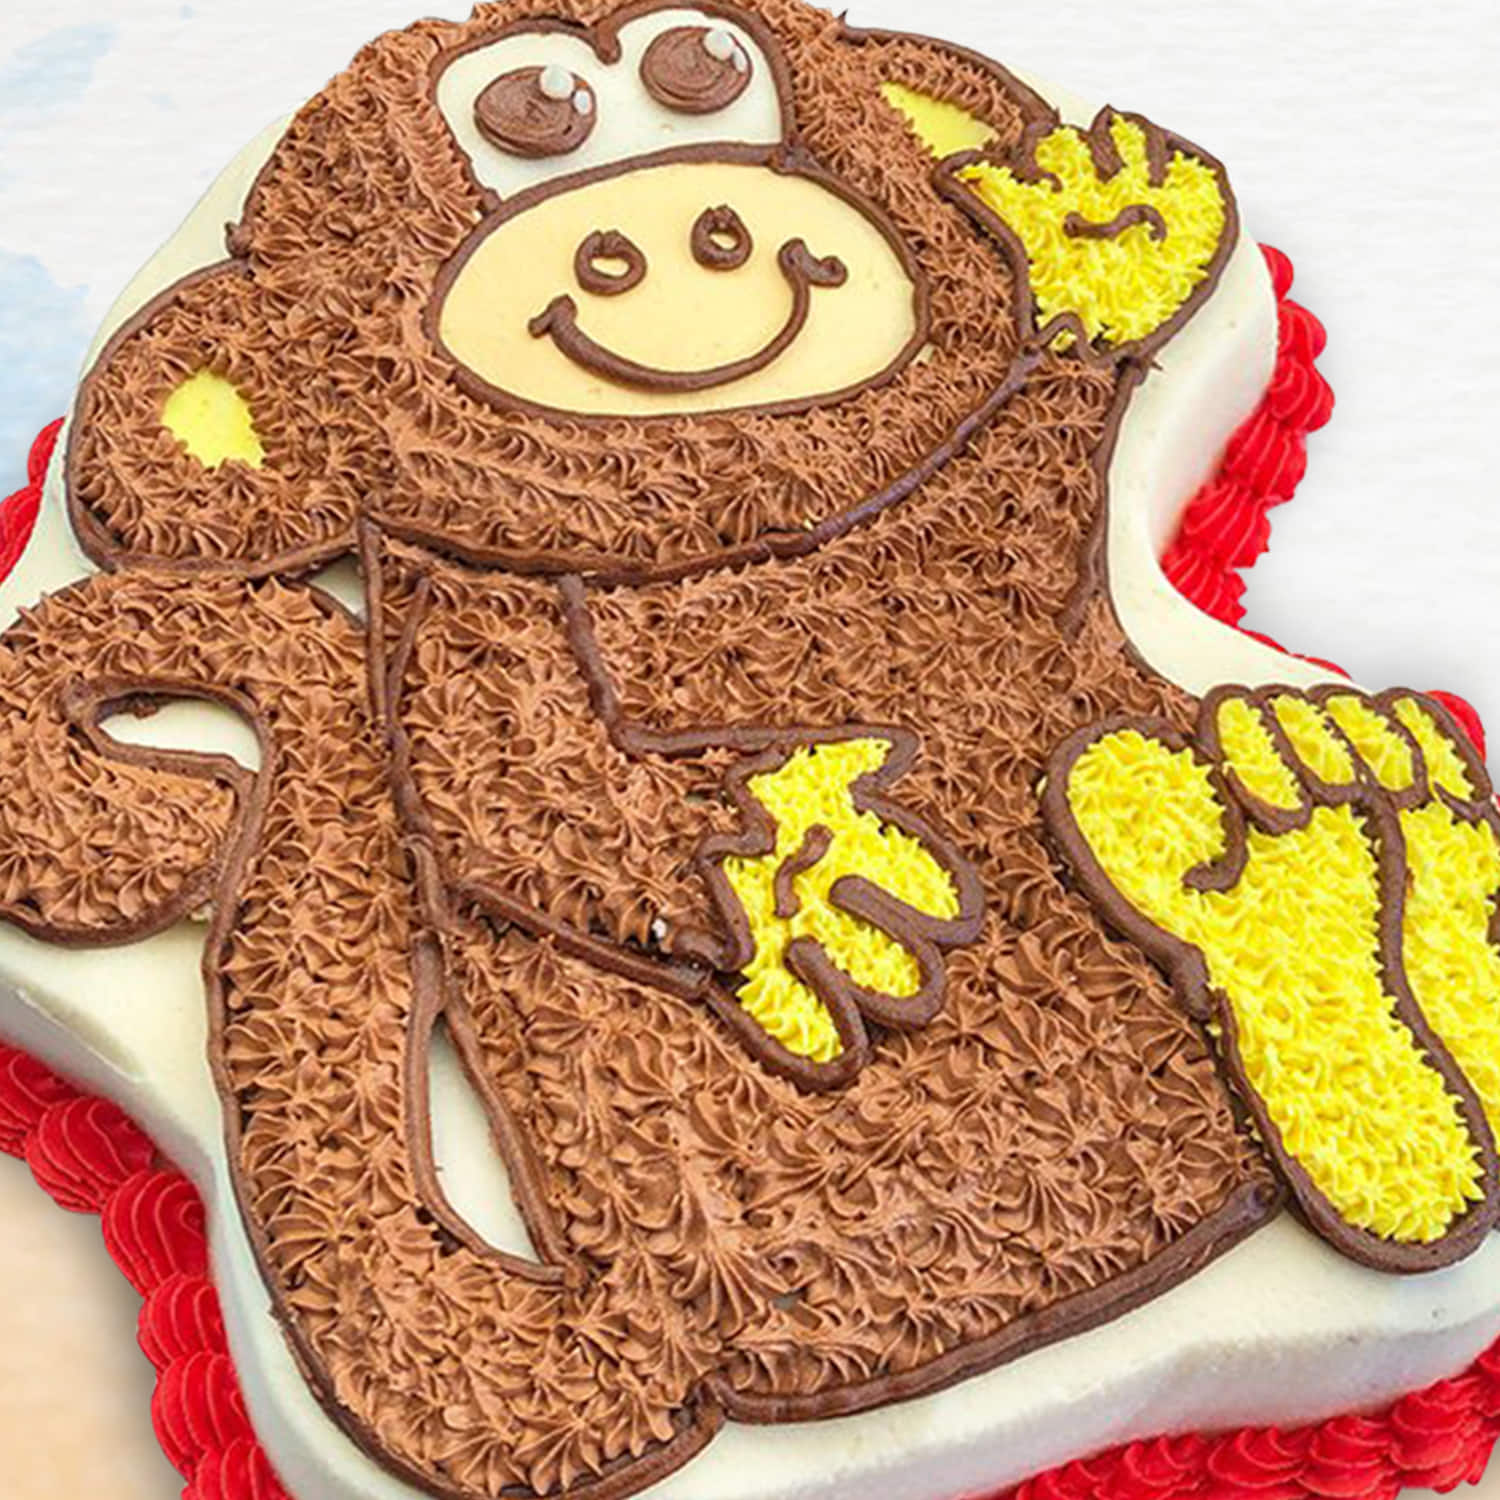 Monkey Baby Shower Cake | Super Sweet Tooth